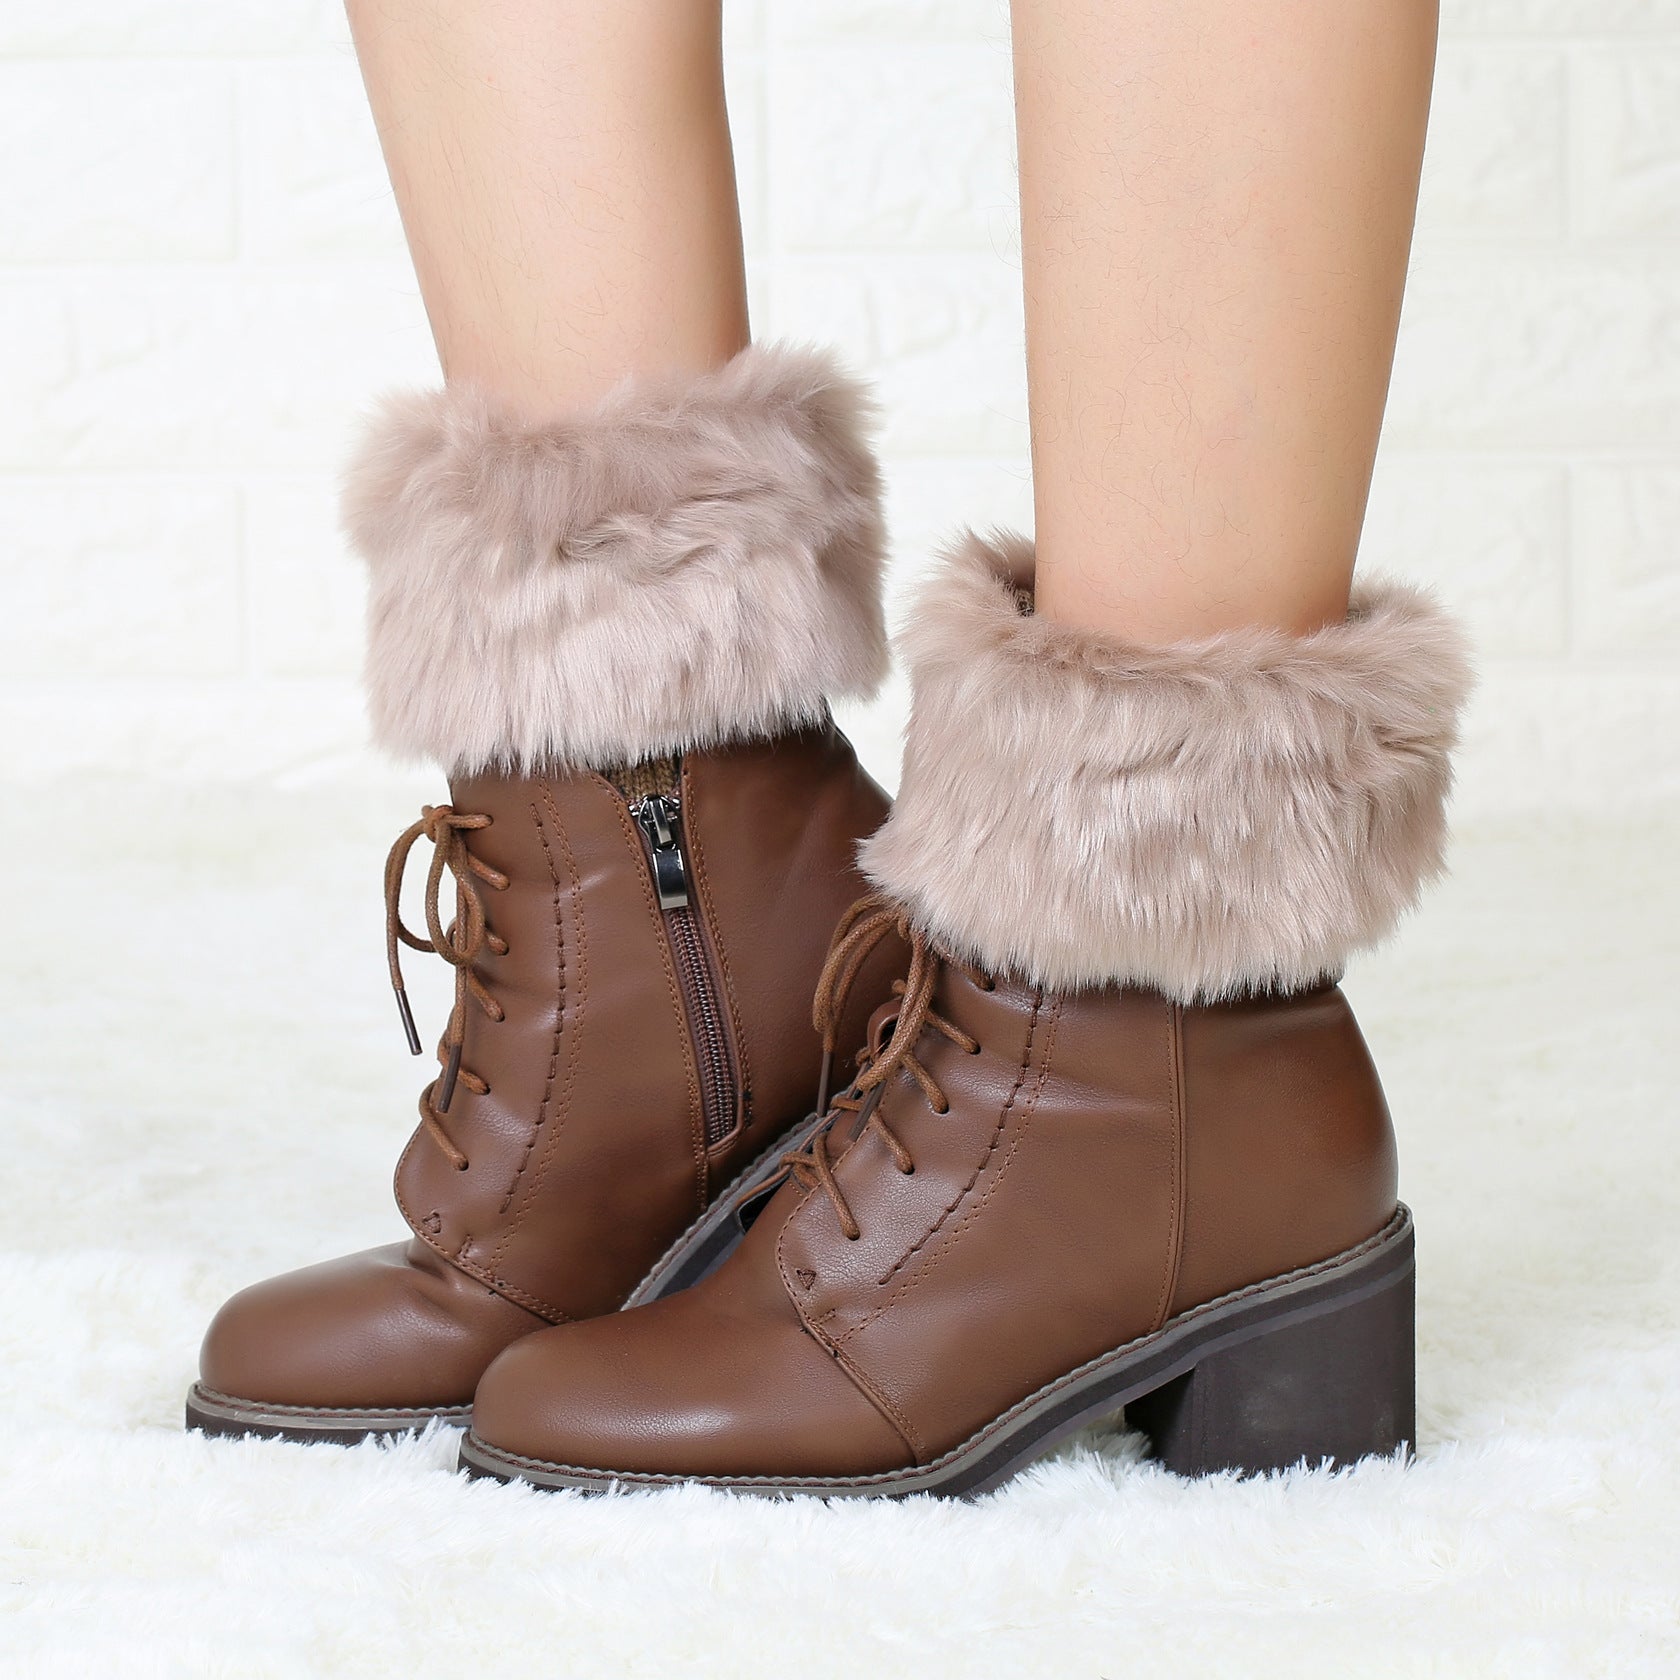 2 Pairs/set Knitted Fur Boot Covers for Women-boot cover-Free Shipping at meselling99